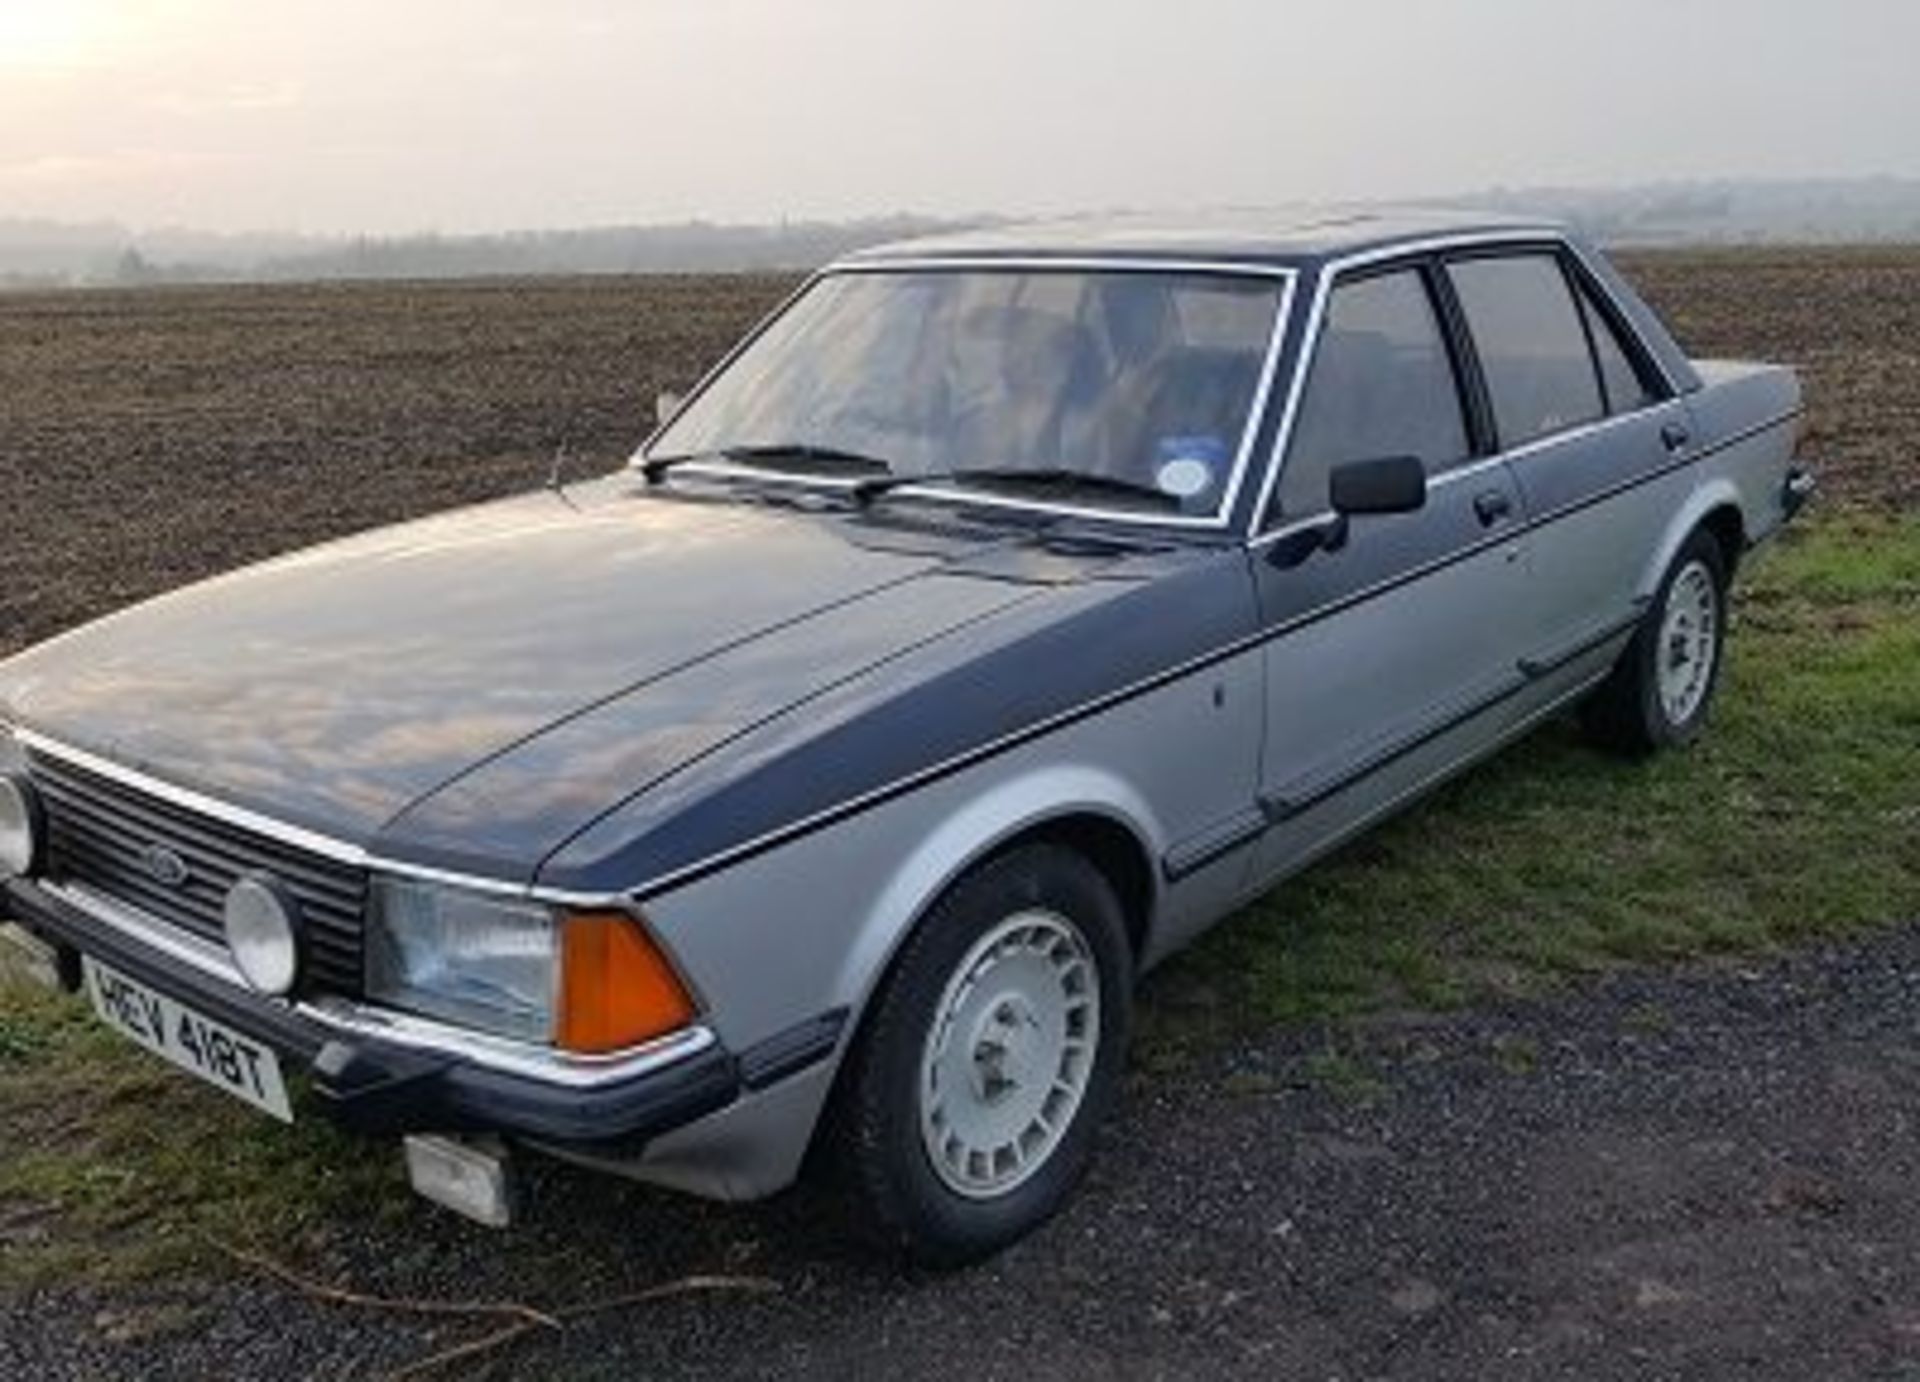 Ford Granada 2.8 Ghia “Sapphire” 1979 - We are pleased to say that the vendor of this rare of rare - Image 6 of 13